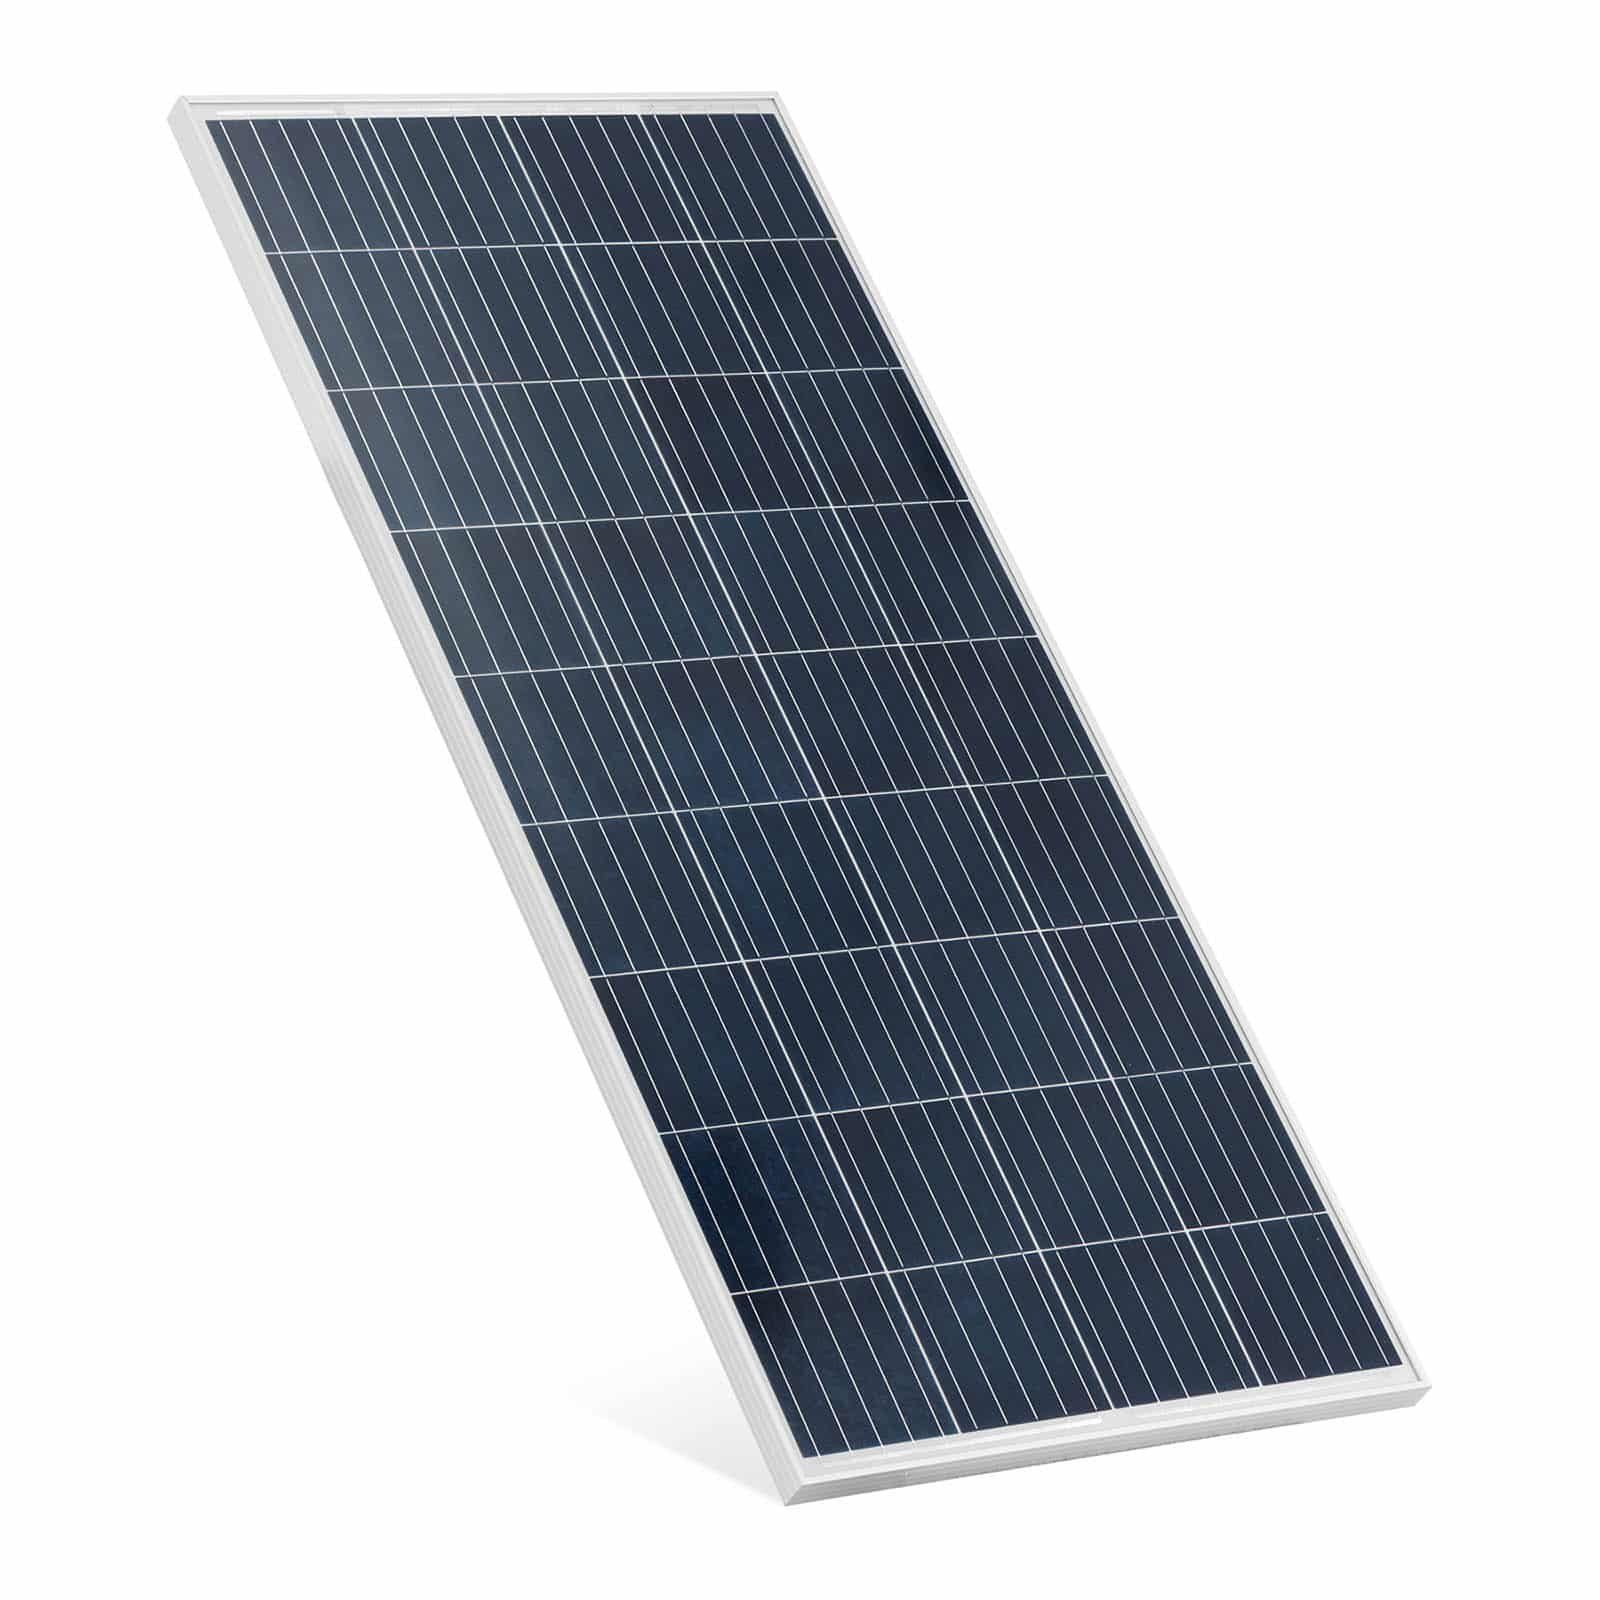 MSW Solarmodul Photovoltaikmodul Bypass-Technologie 170W Solarpanel